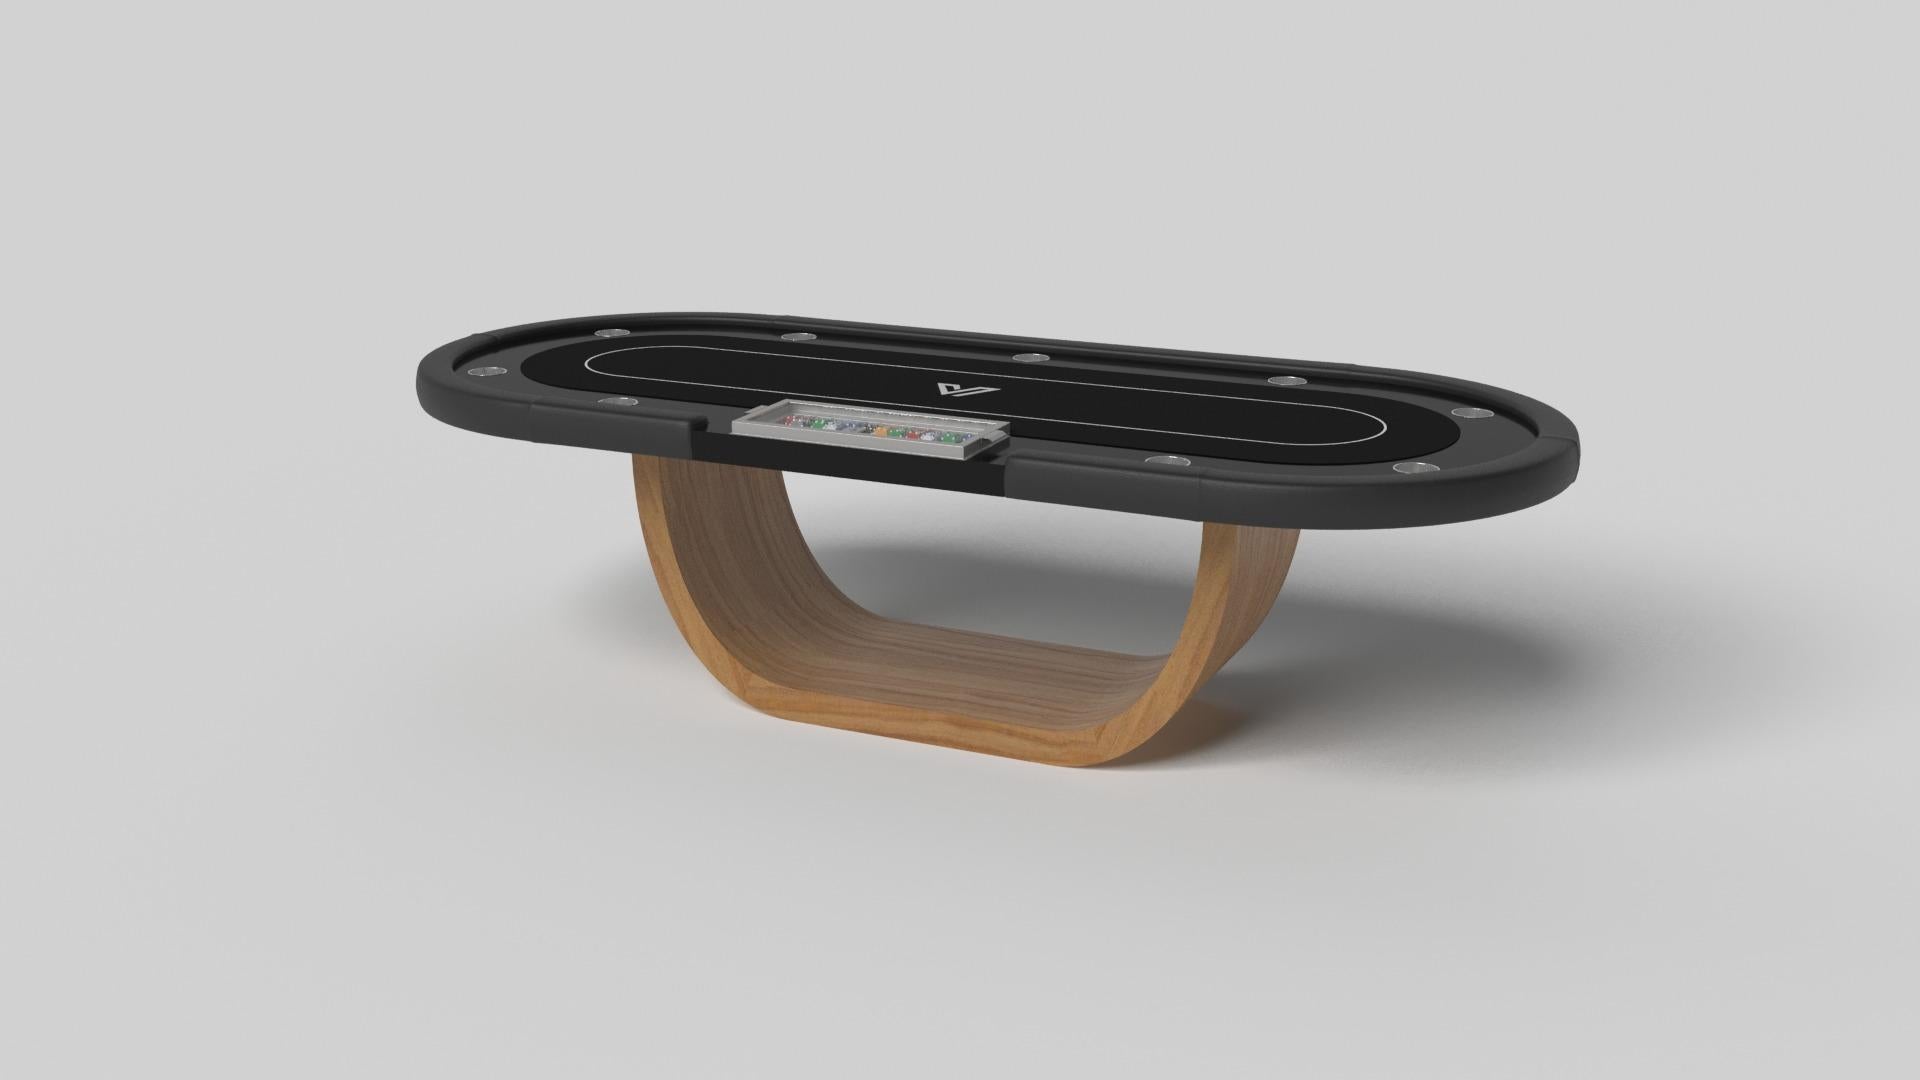 Handcrafted with intricate accents and a precision-carved curved base, the Sid poker table in black encompasses a series of smooth edges, distinctive details, and unconventional elements in one unique expression of luxury design. Built by hand from